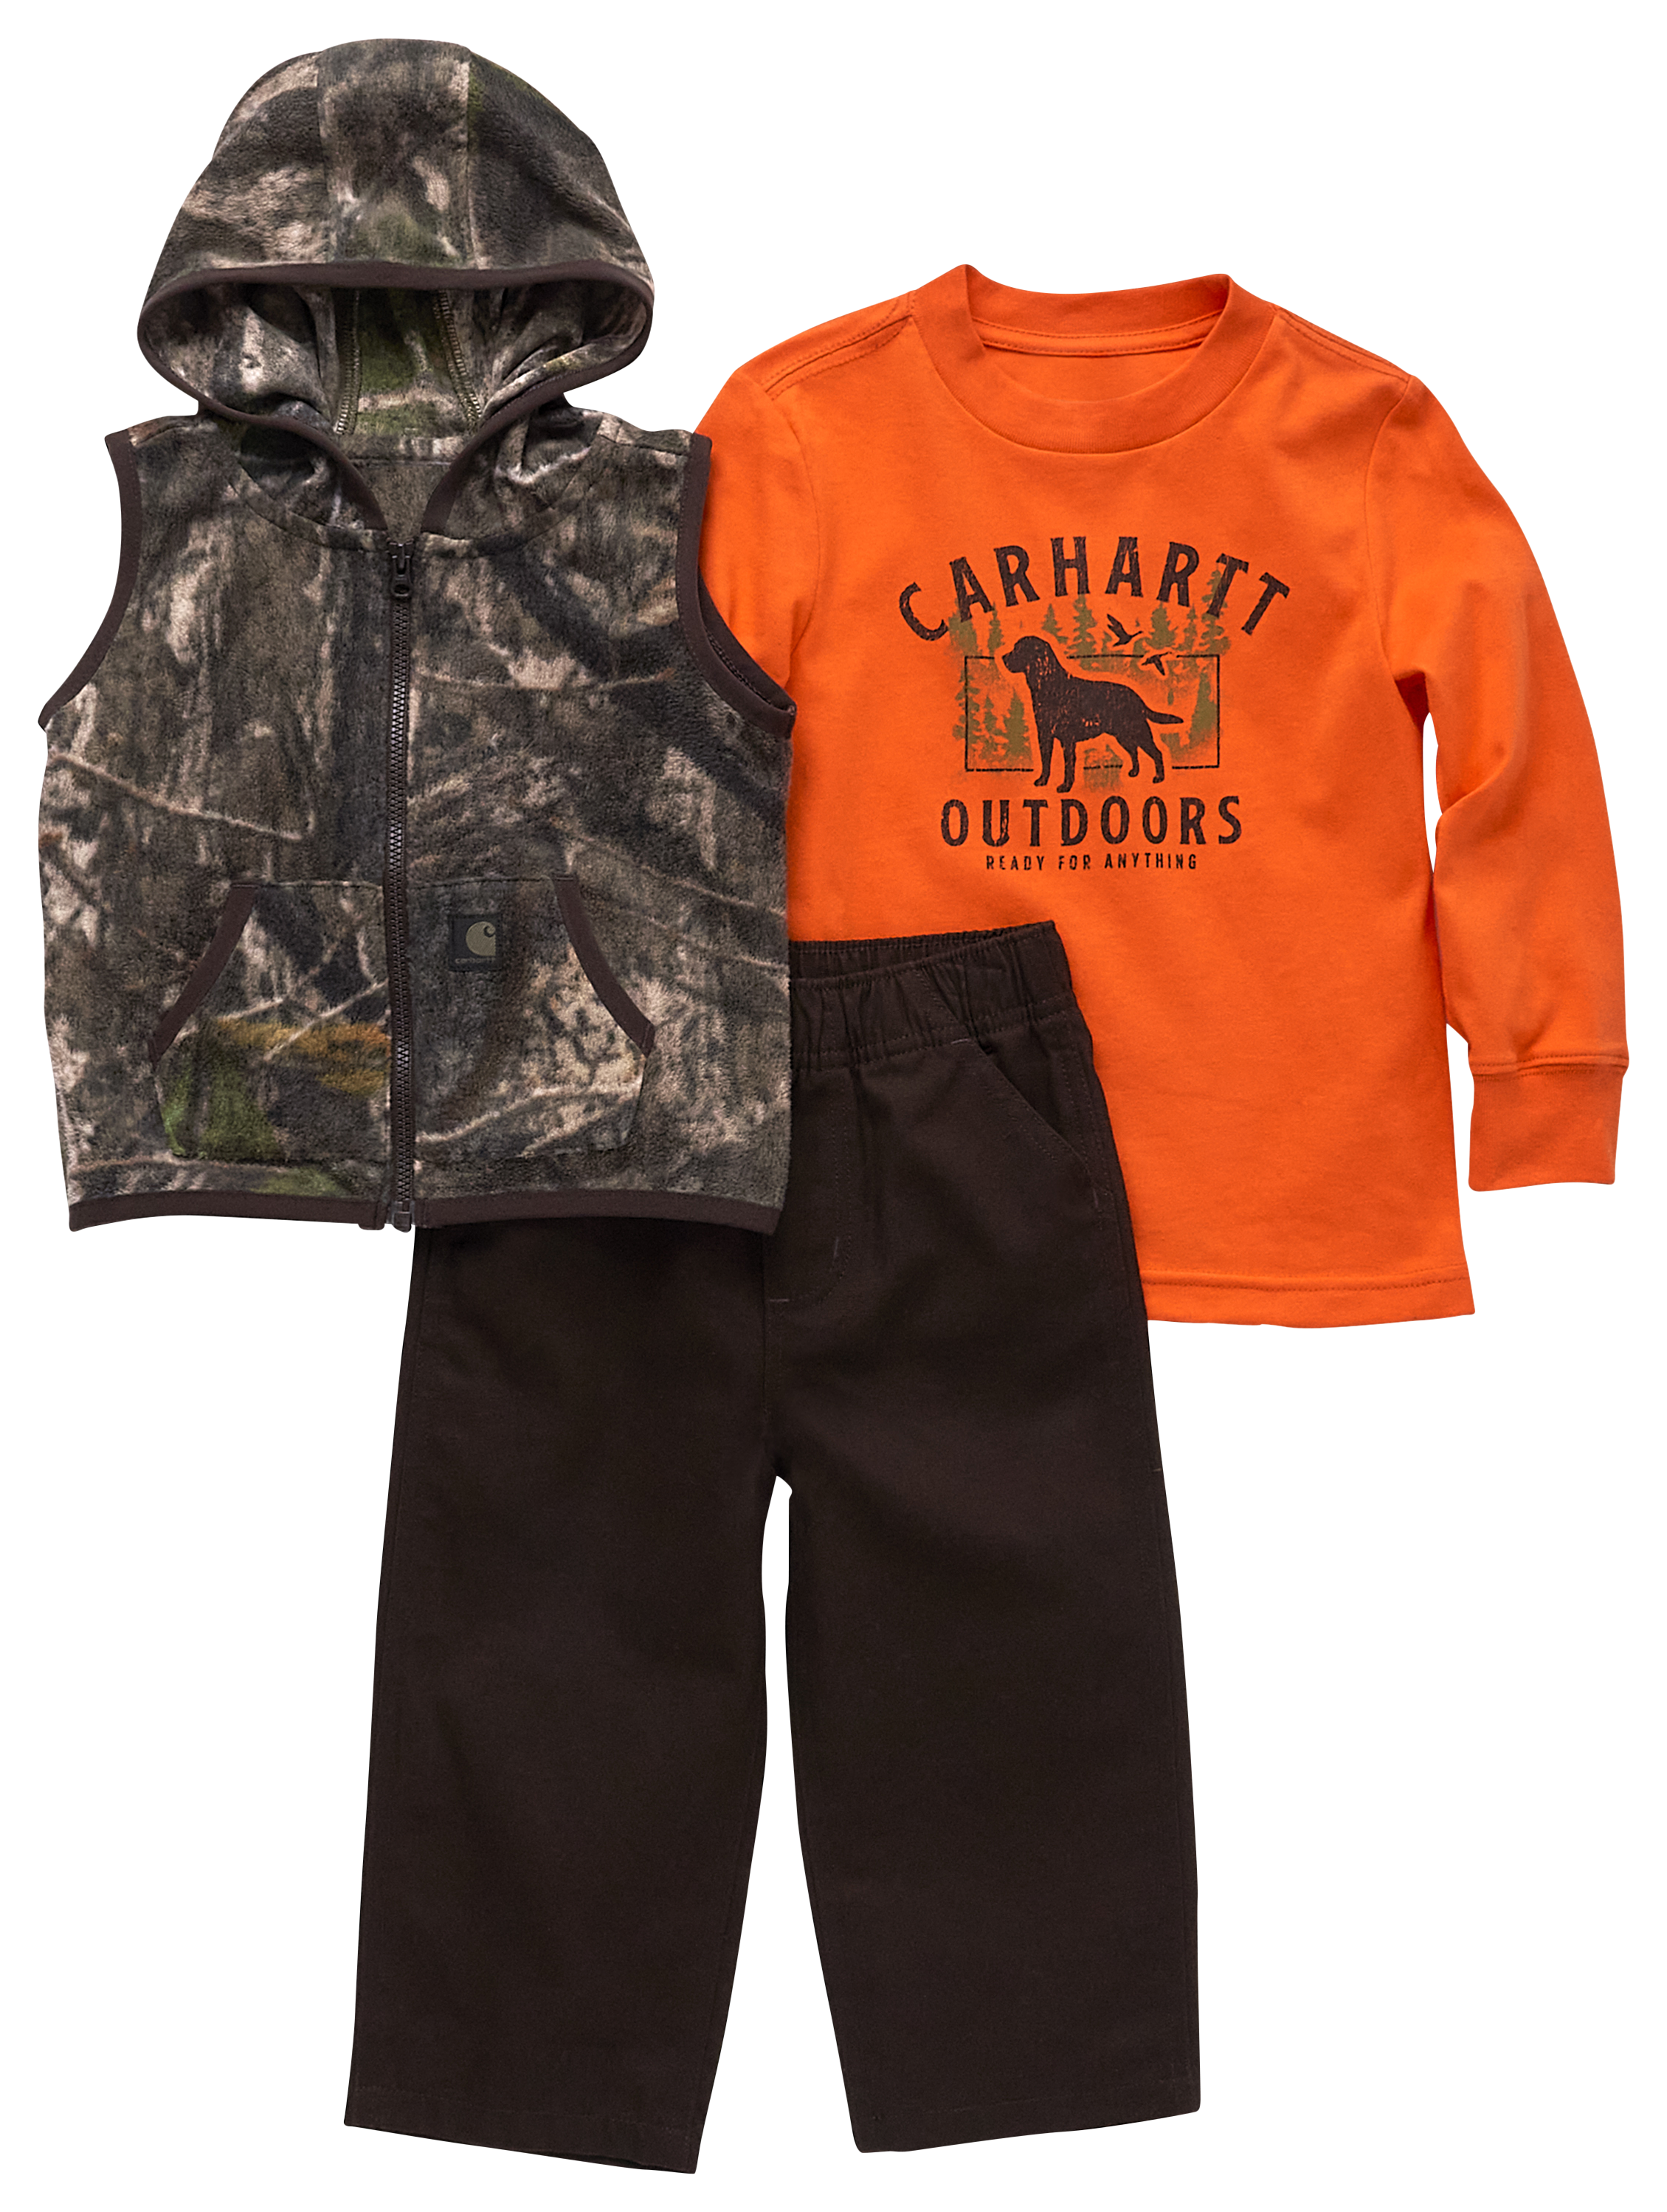 Carhartt Long-Sleeve T-Shirt, Camo Vest, and Canvas Pants 3-Piece Set for Babies - Mossy Oak Country DNA - 24 Months